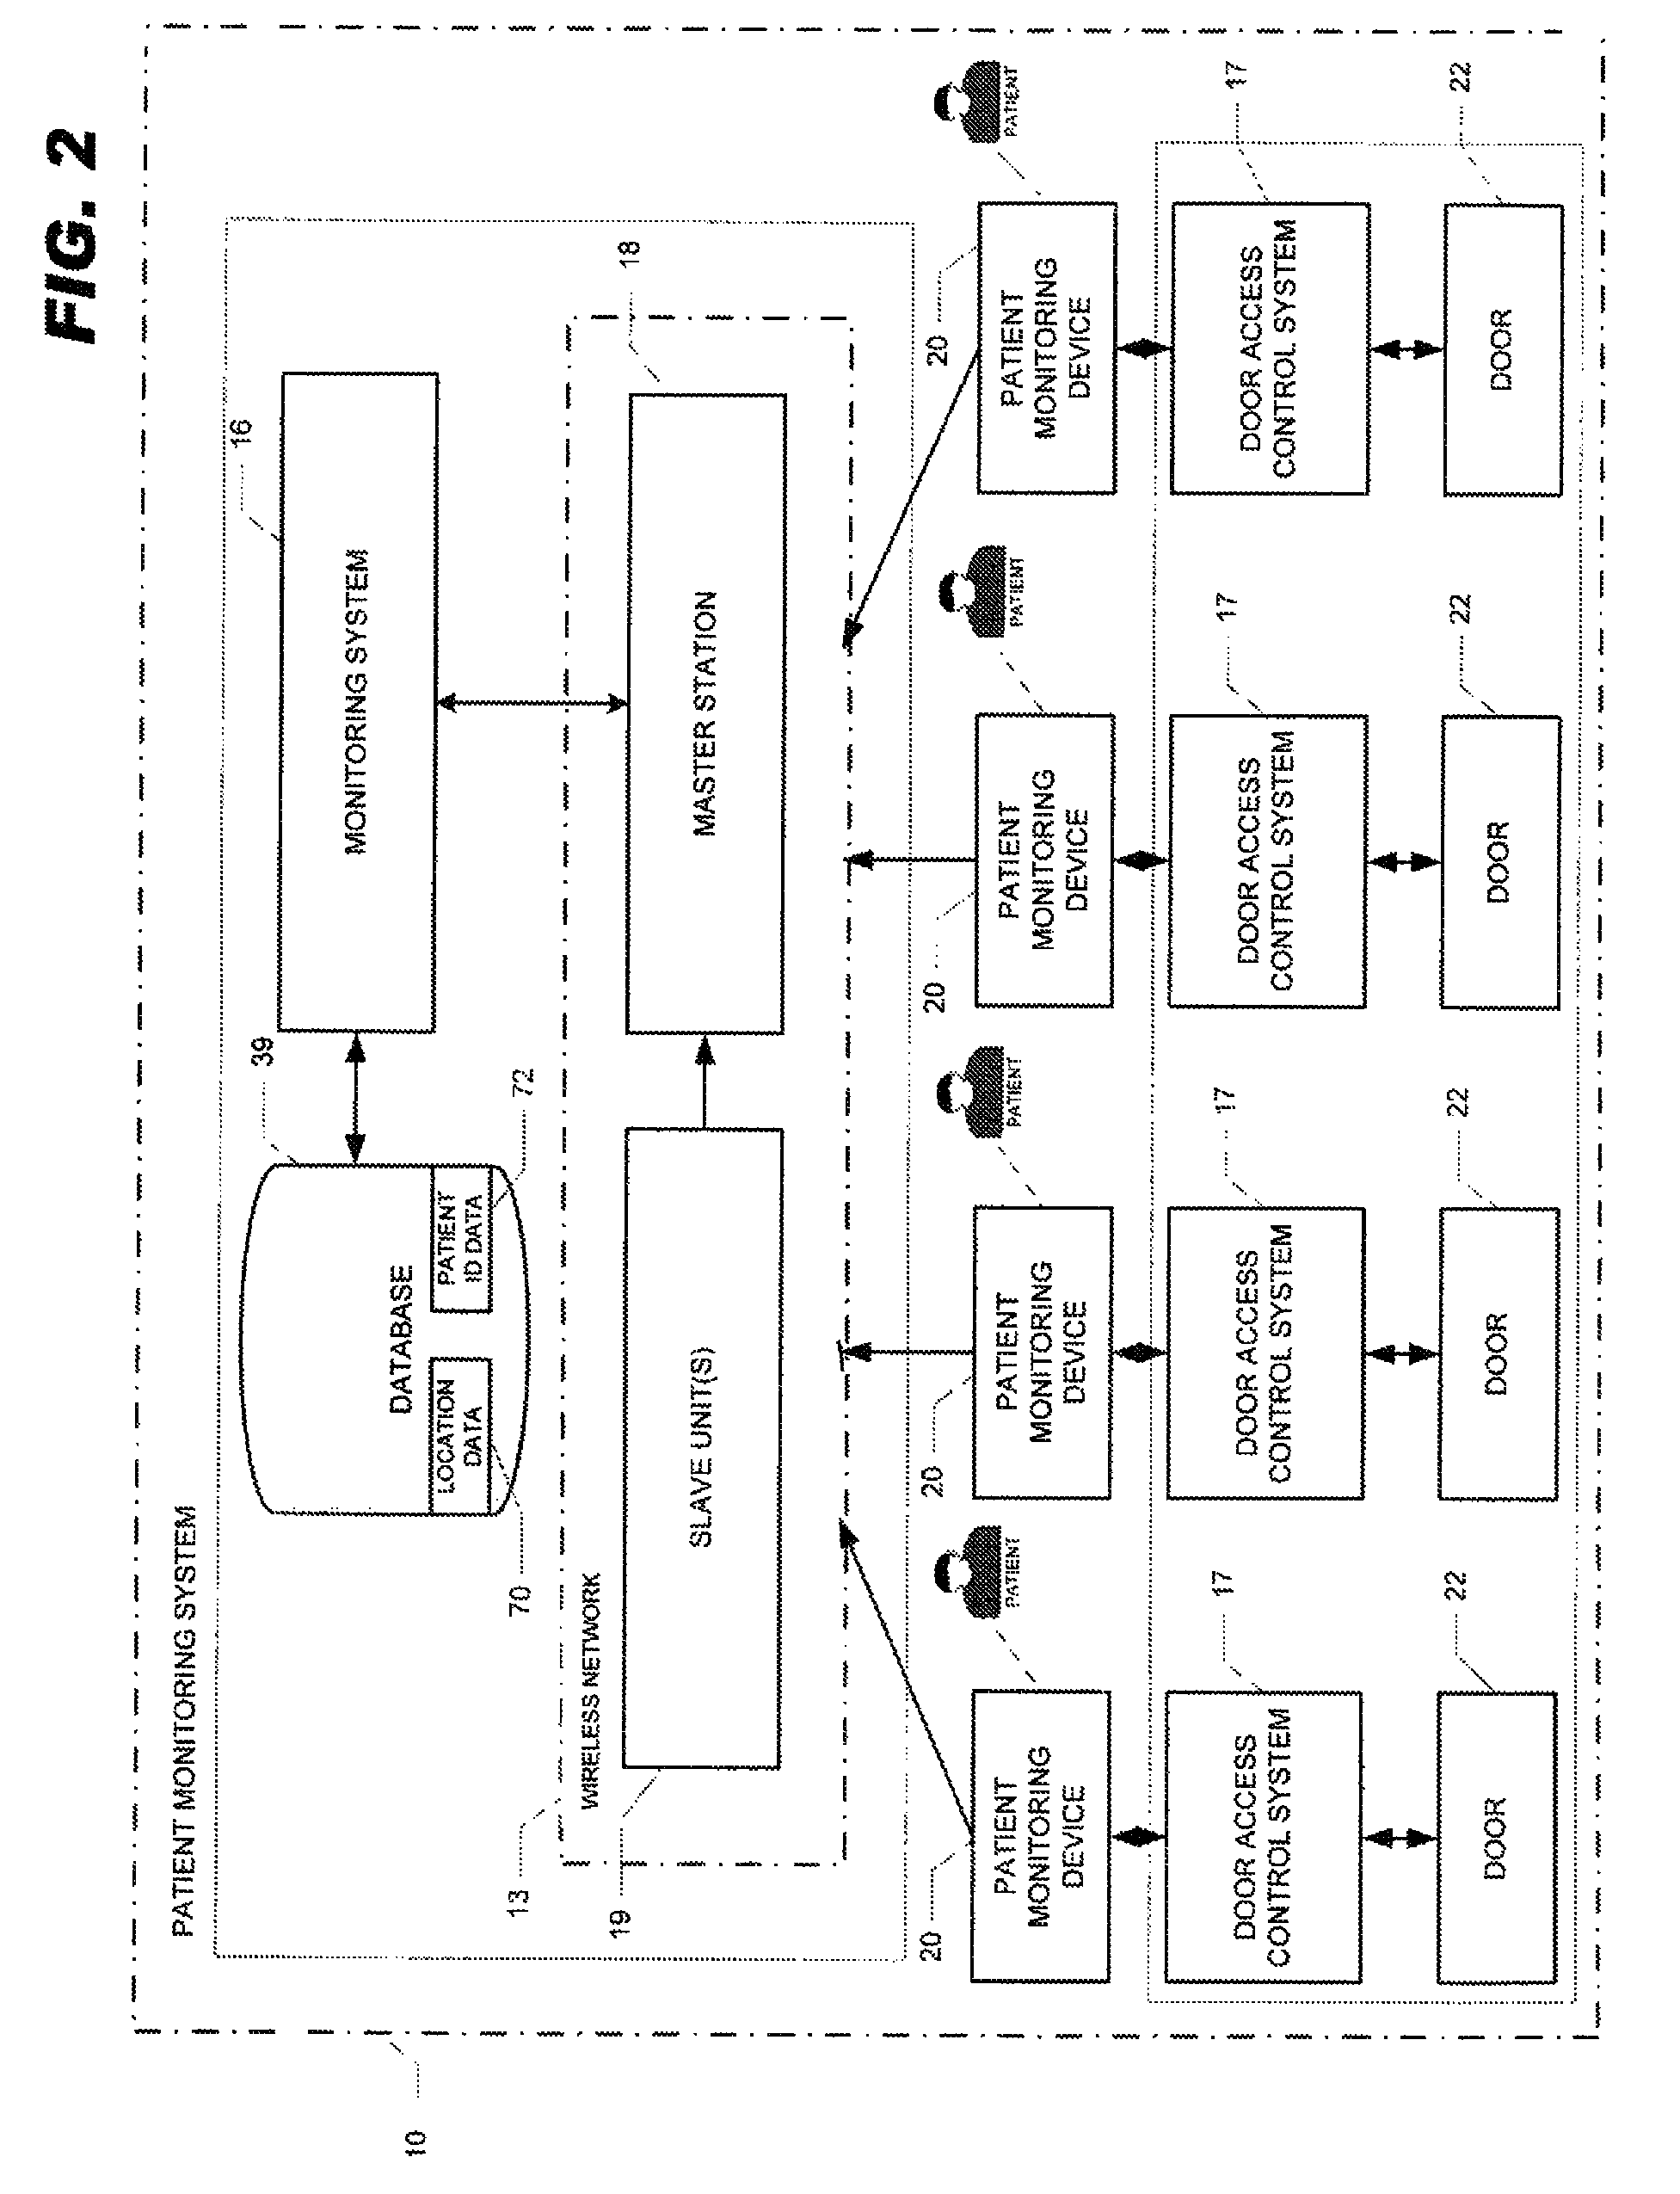 Methods and systems for door access and patient monitoring